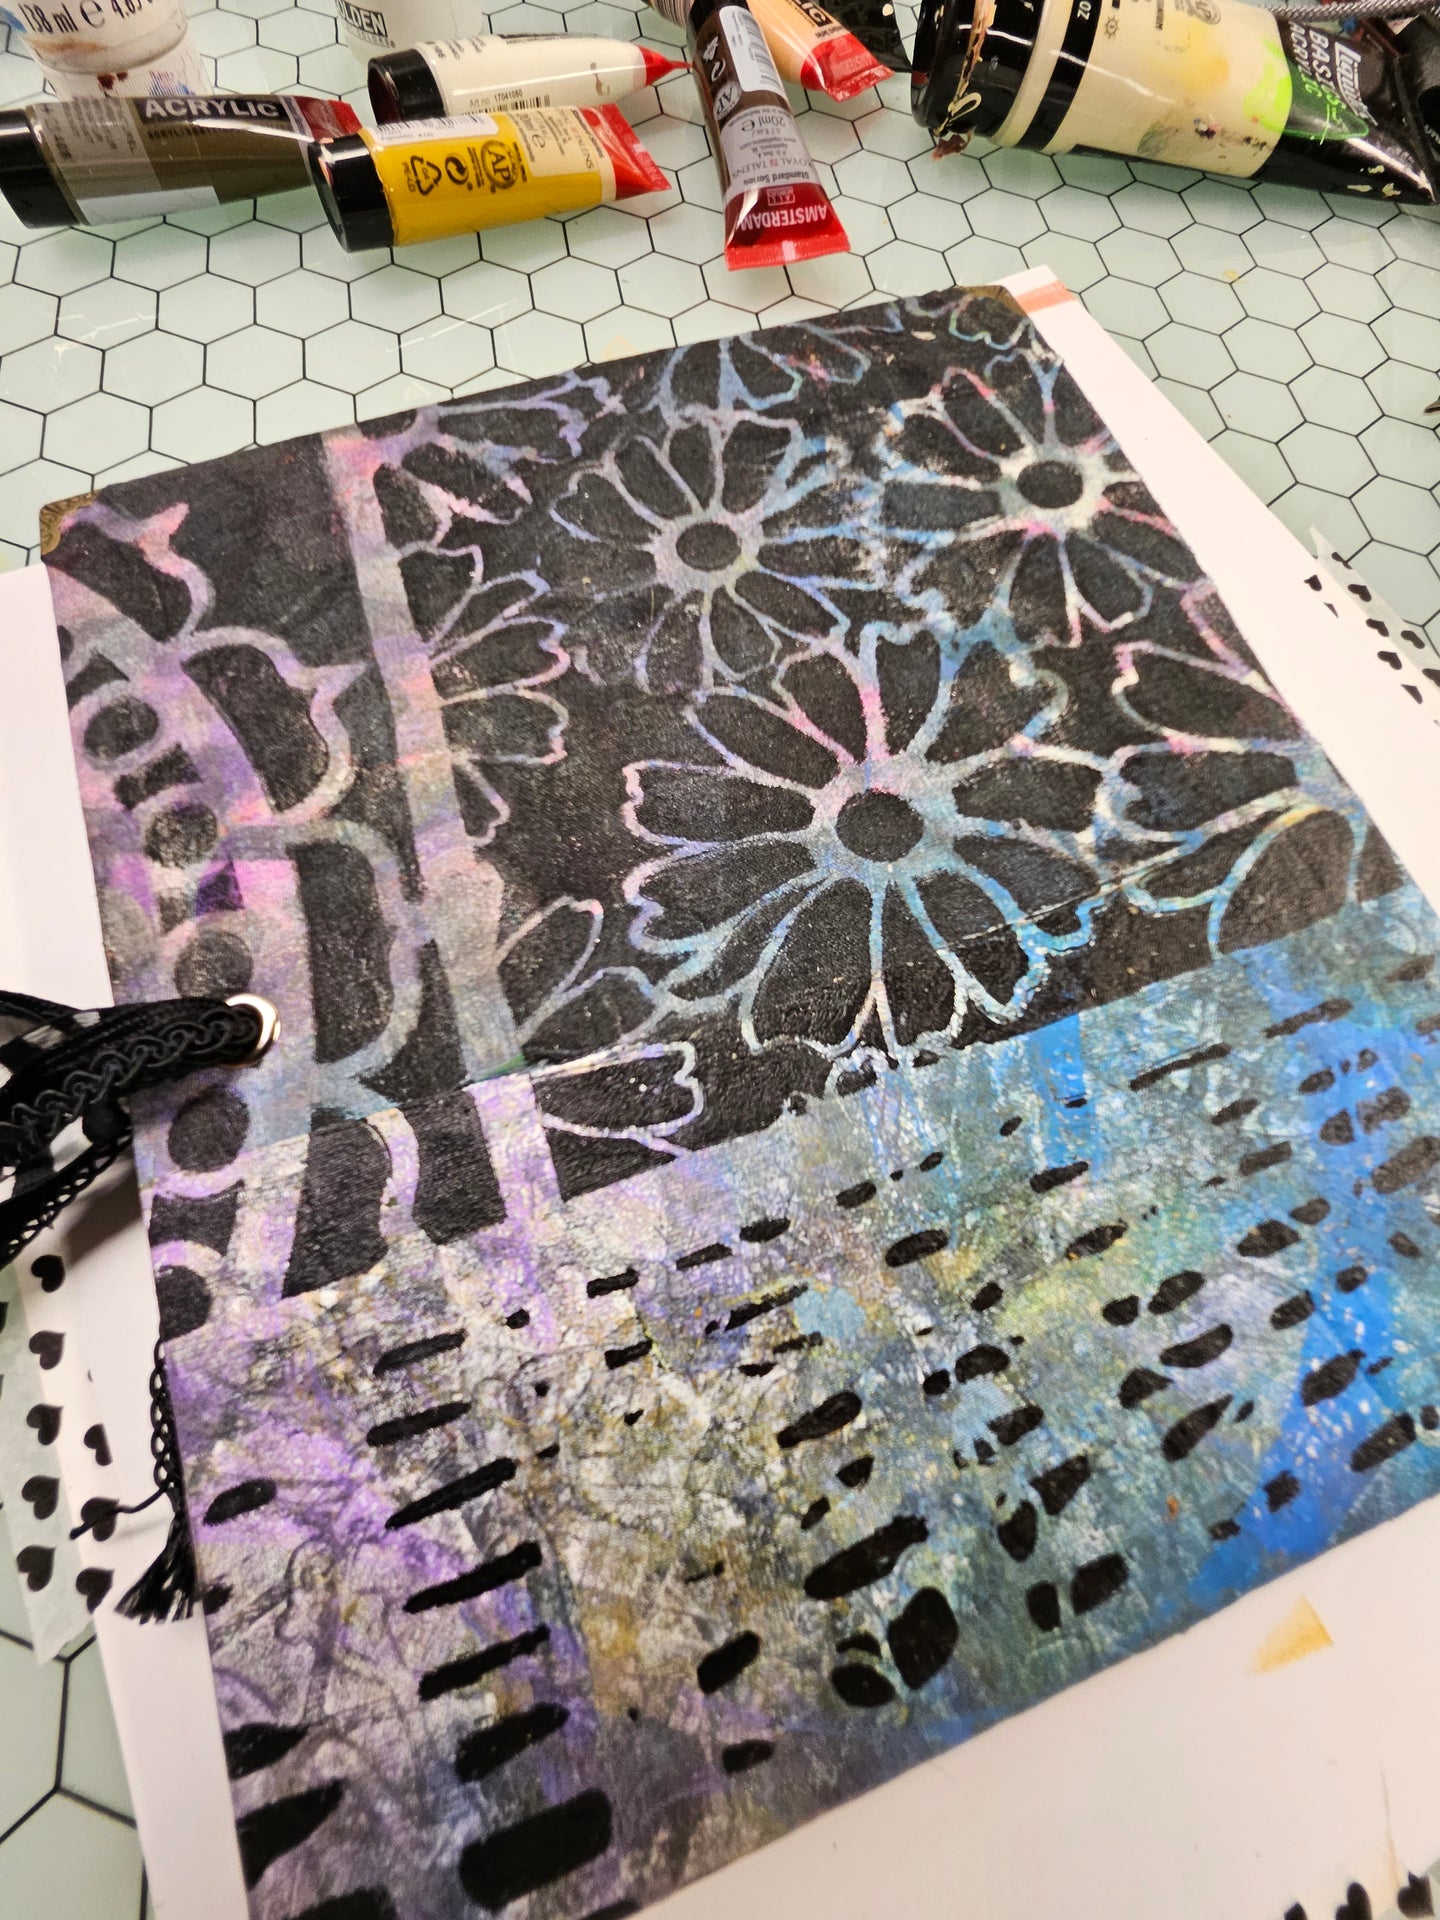 Gorgeous Grunge Journal: 8.75"x6.75" - Multi-Media Pages, Acrylic Paint, Tab Binding, Tie Closure, Fabric Cover